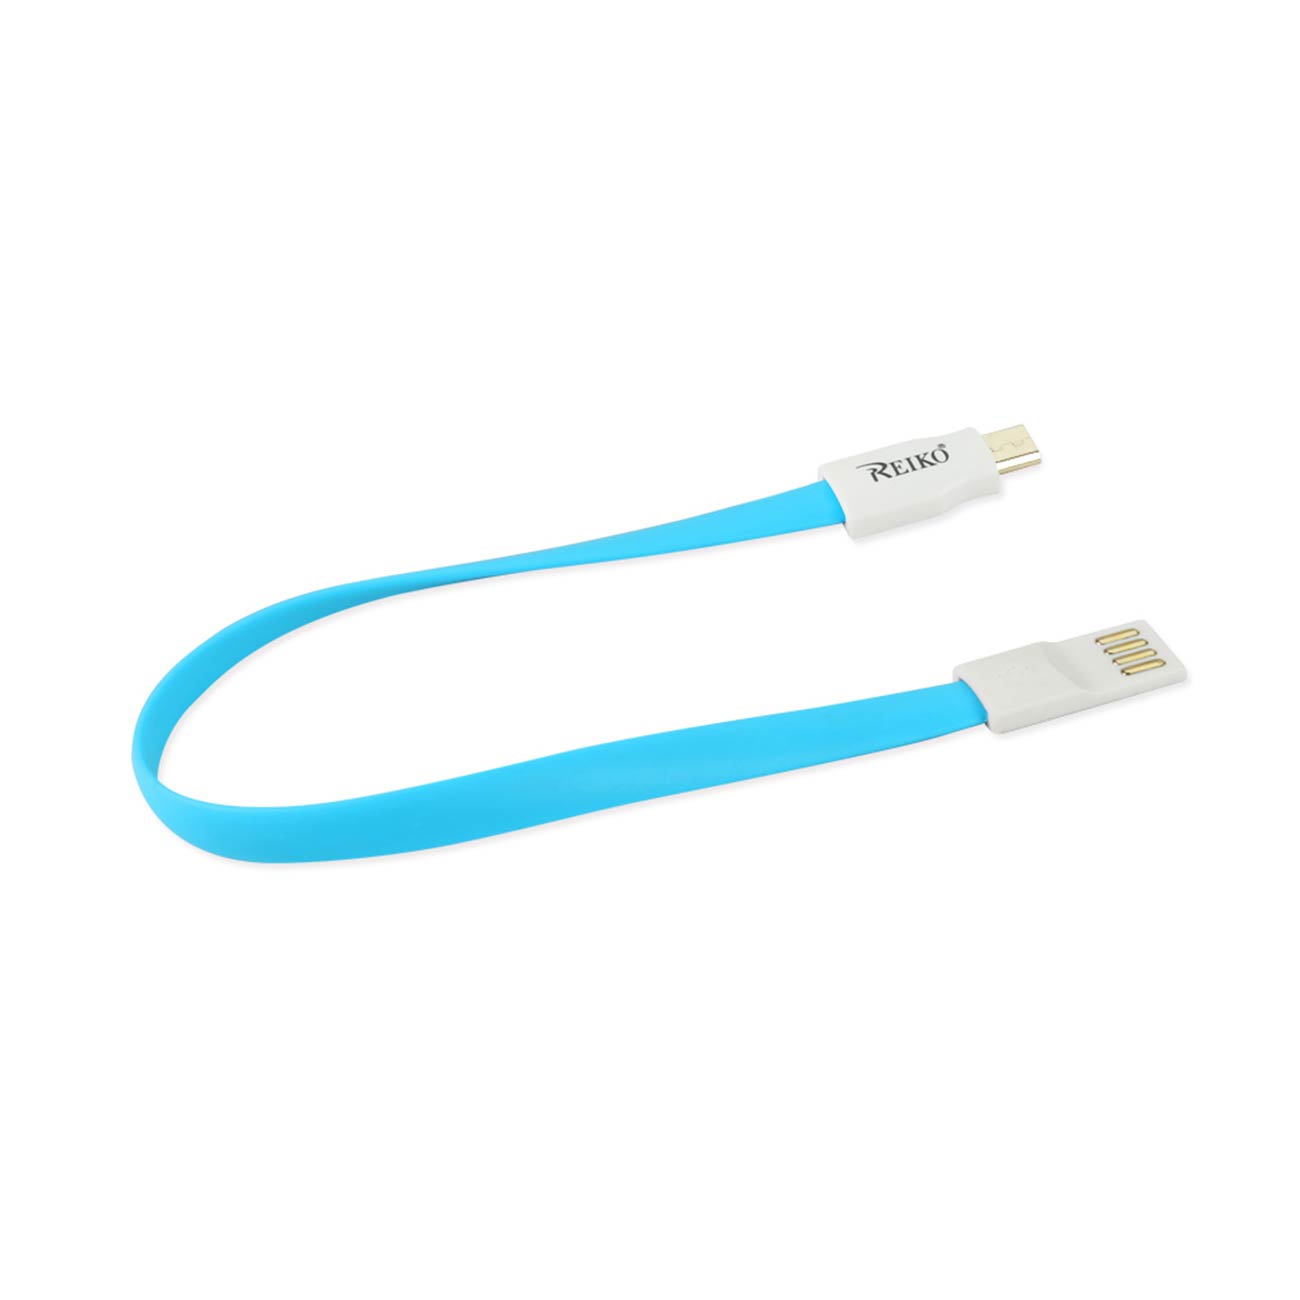 Data Cable USB Micro Flat Magnetic Gold Plated 0.7 Foot Blue Color